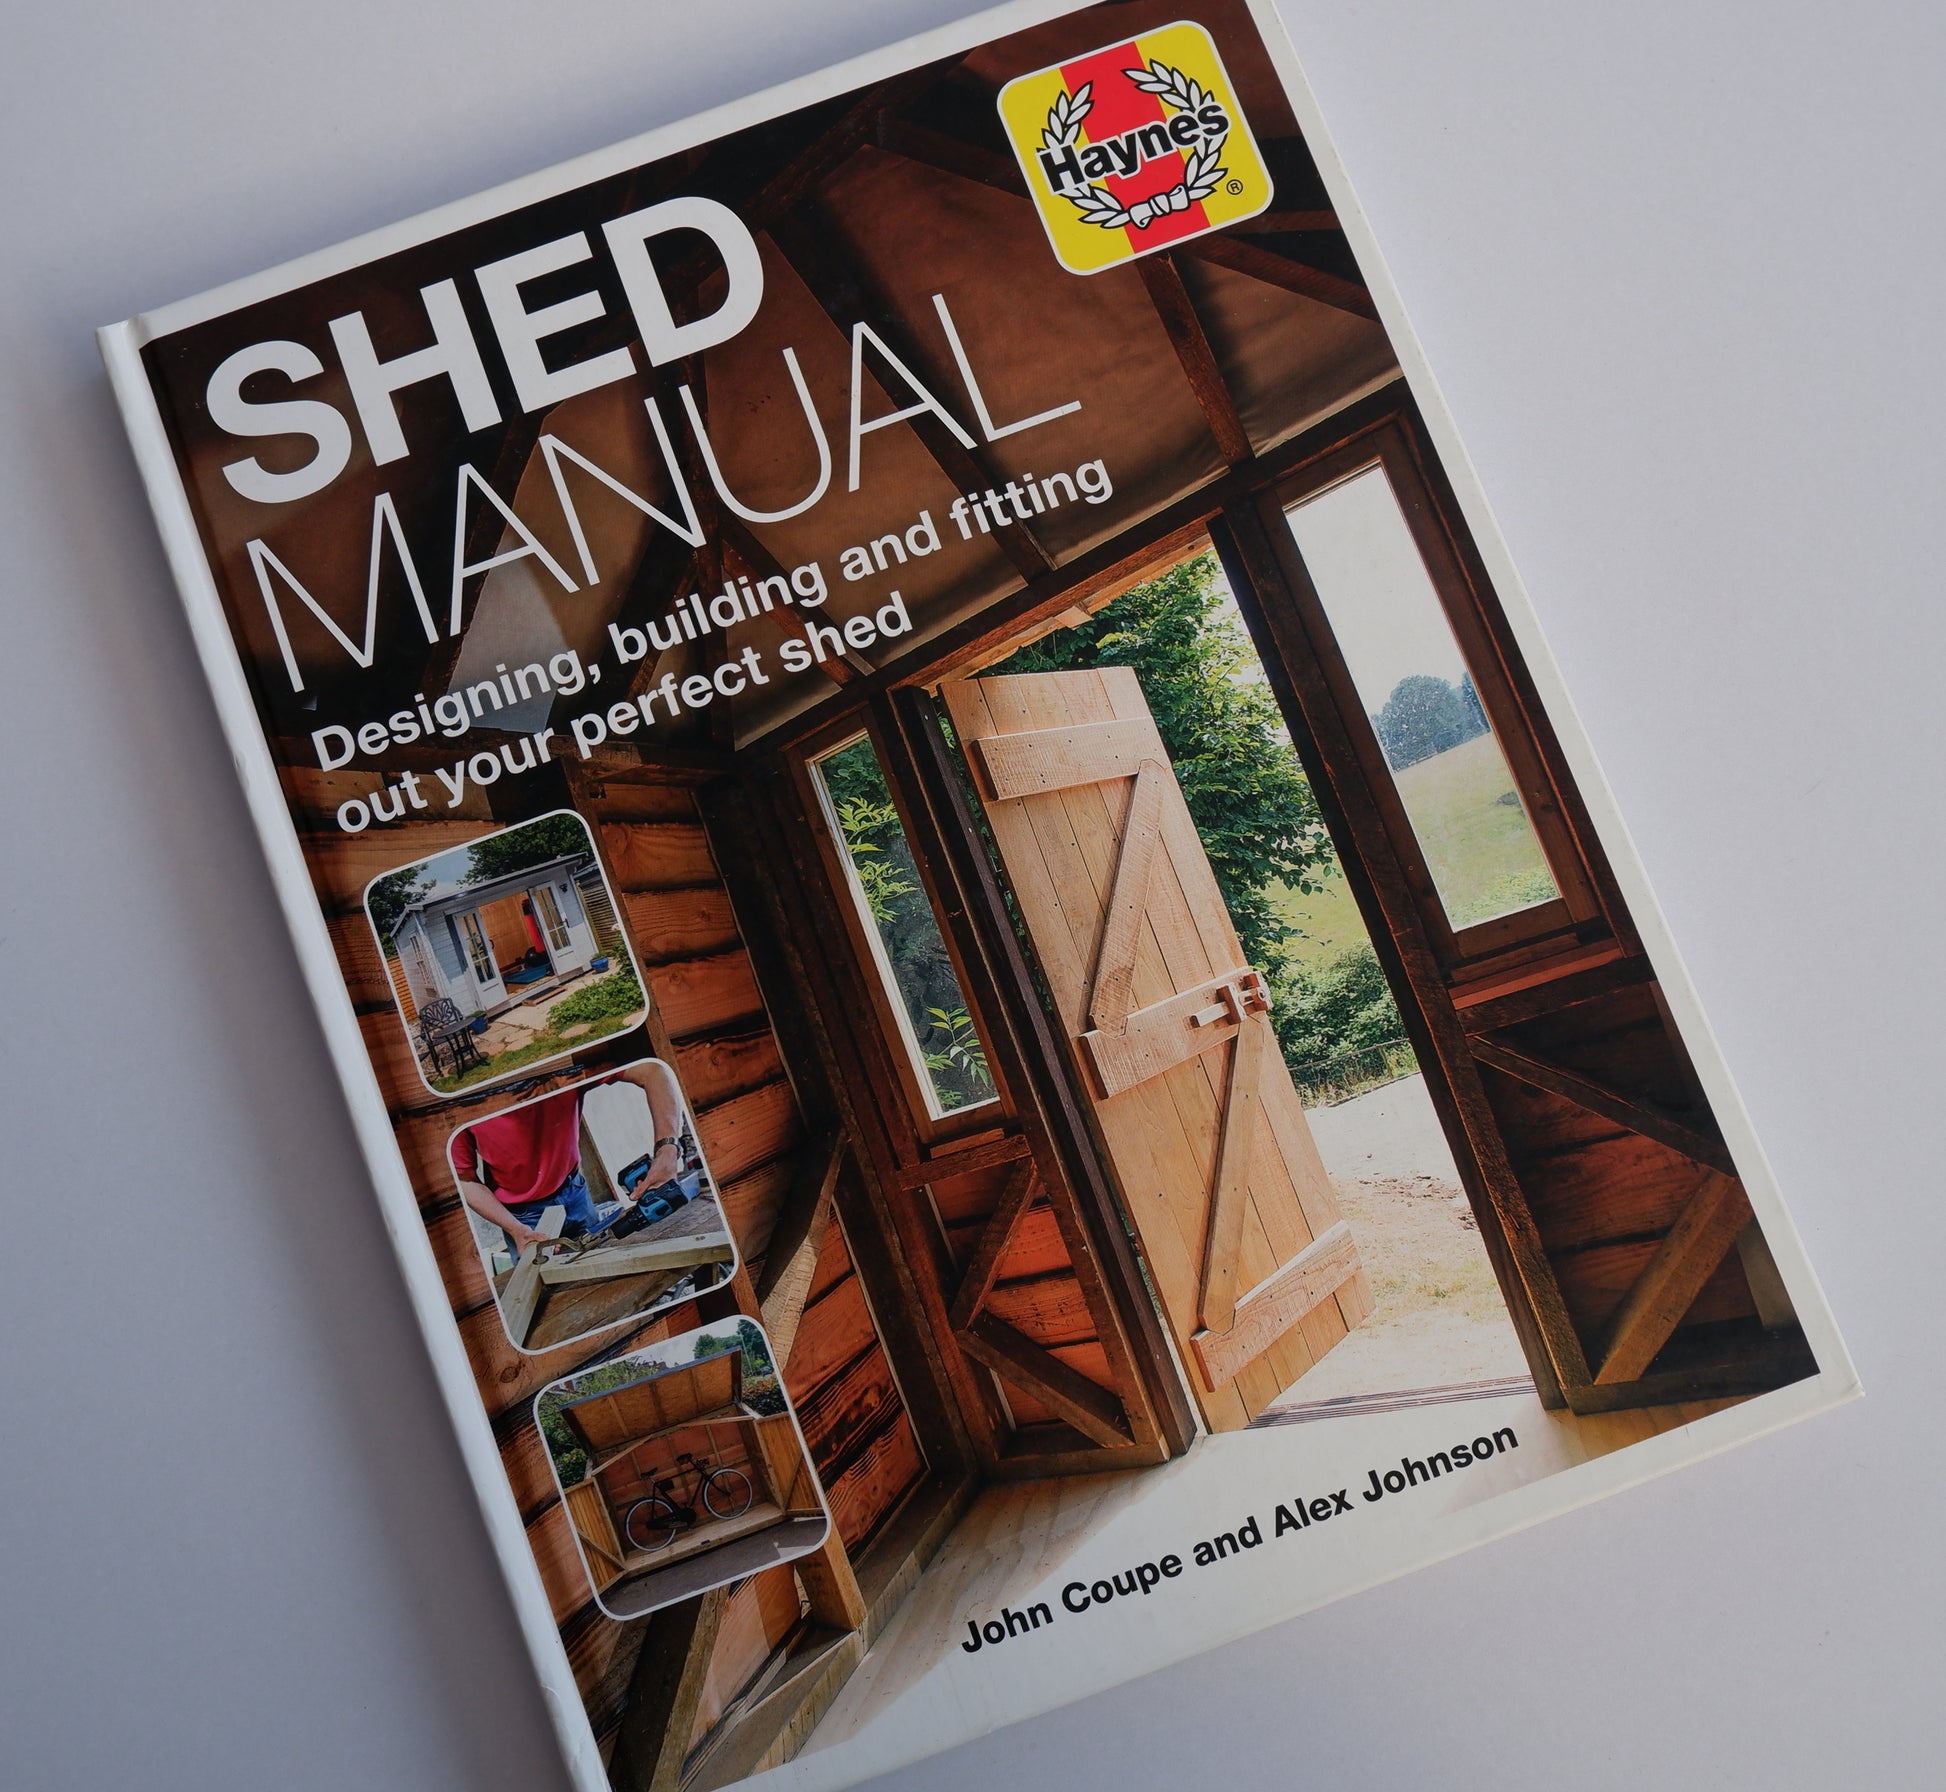 Haynes: Shed Manual : Designing, building and fitting out your perfect shed book